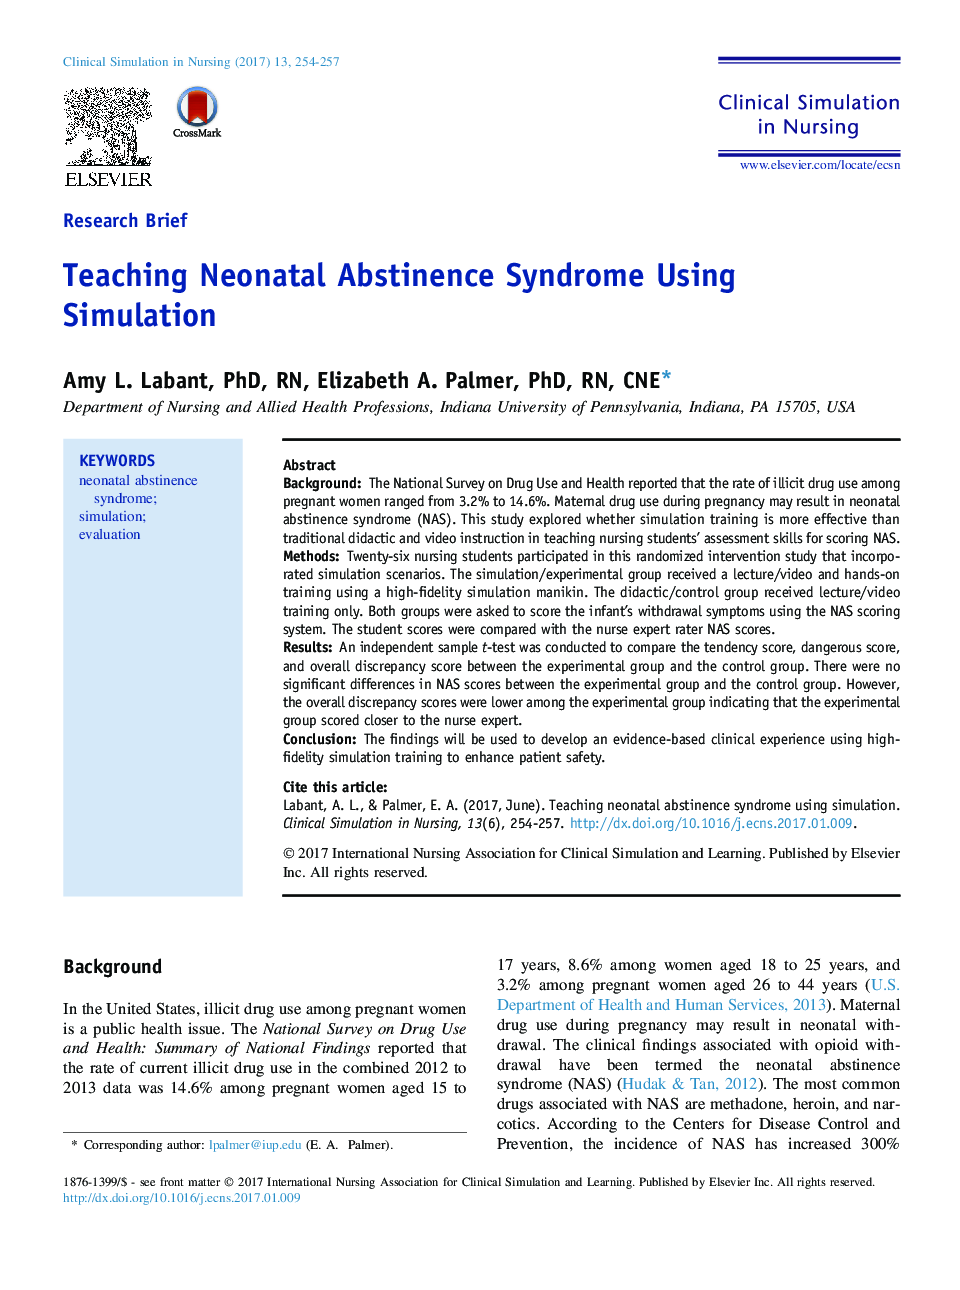 Teaching Neonatal Abstinence Syndrome Using Simulation